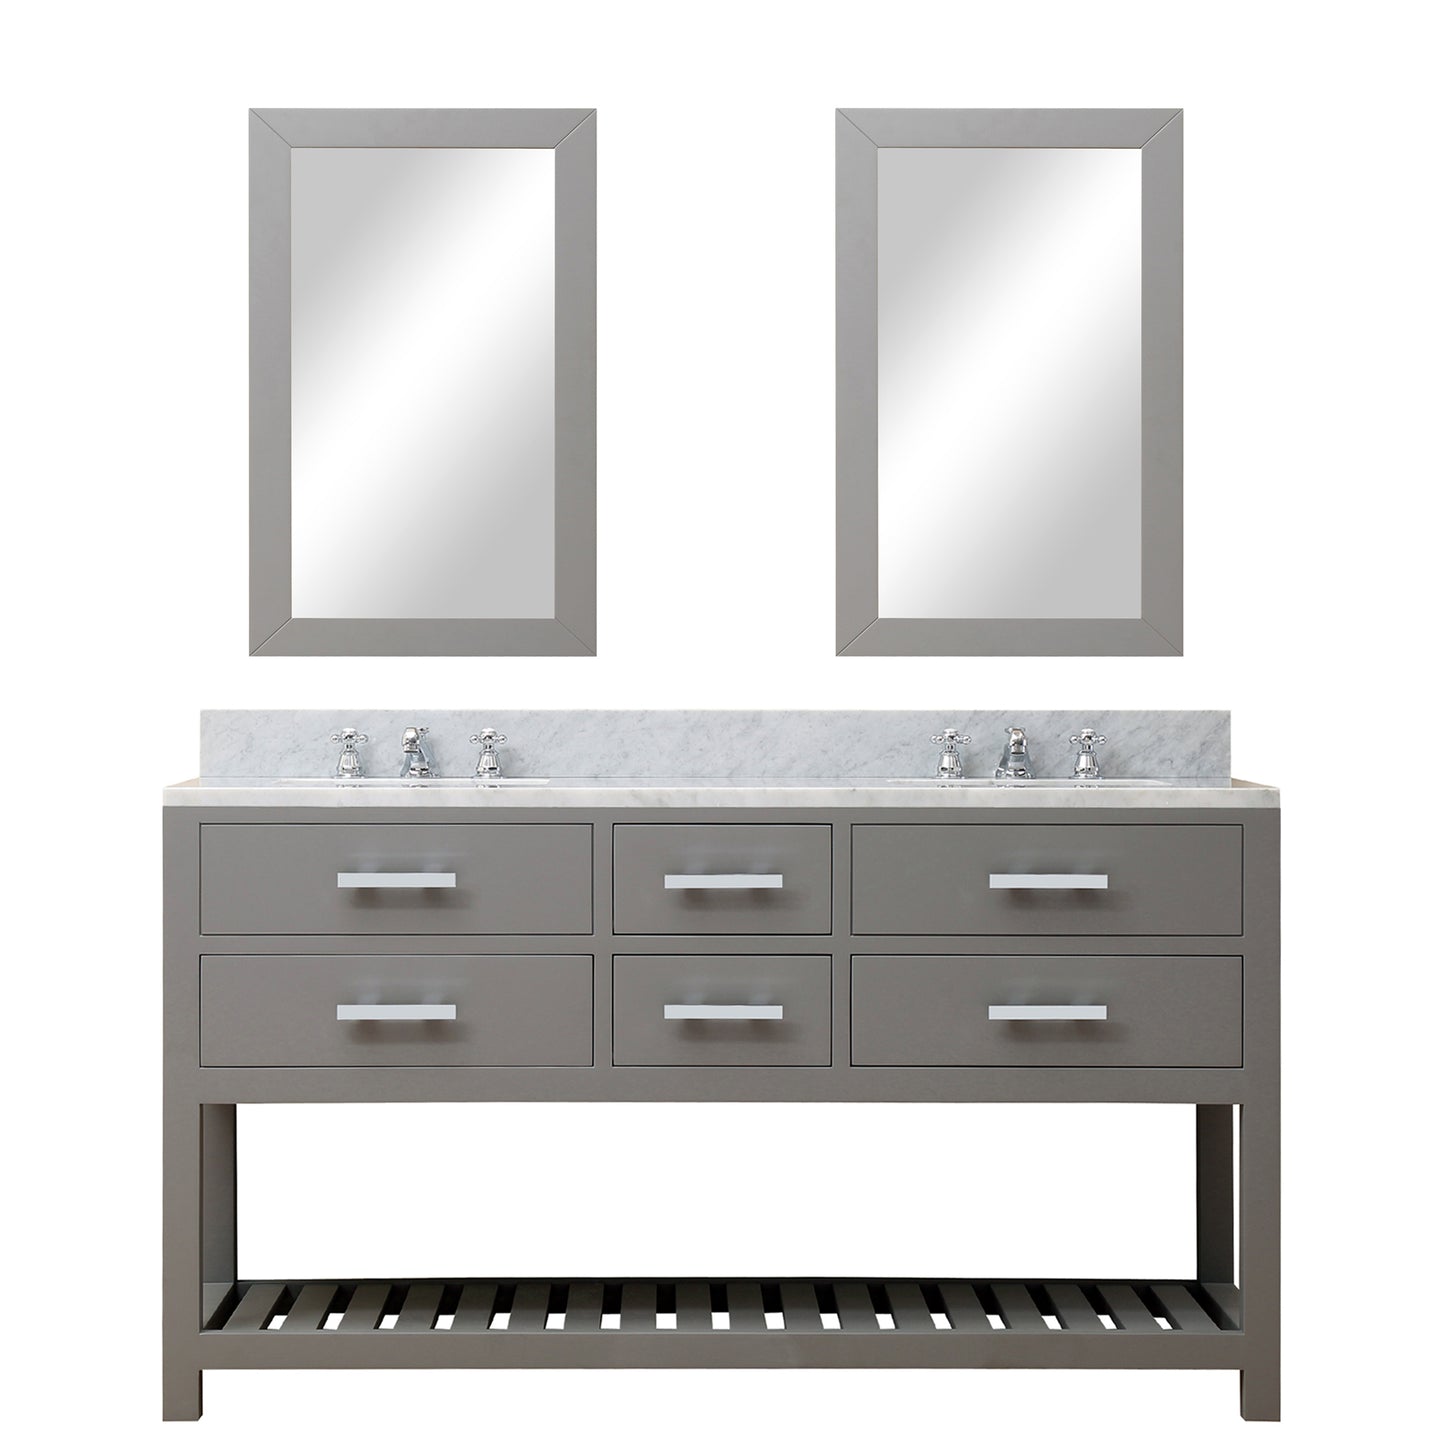 Water Creation 60 Inch Double Sink Bathroom Vanity With 2 Matching Framed Mirrors From The Madalyn Collection - Luxe Bathroom Vanities